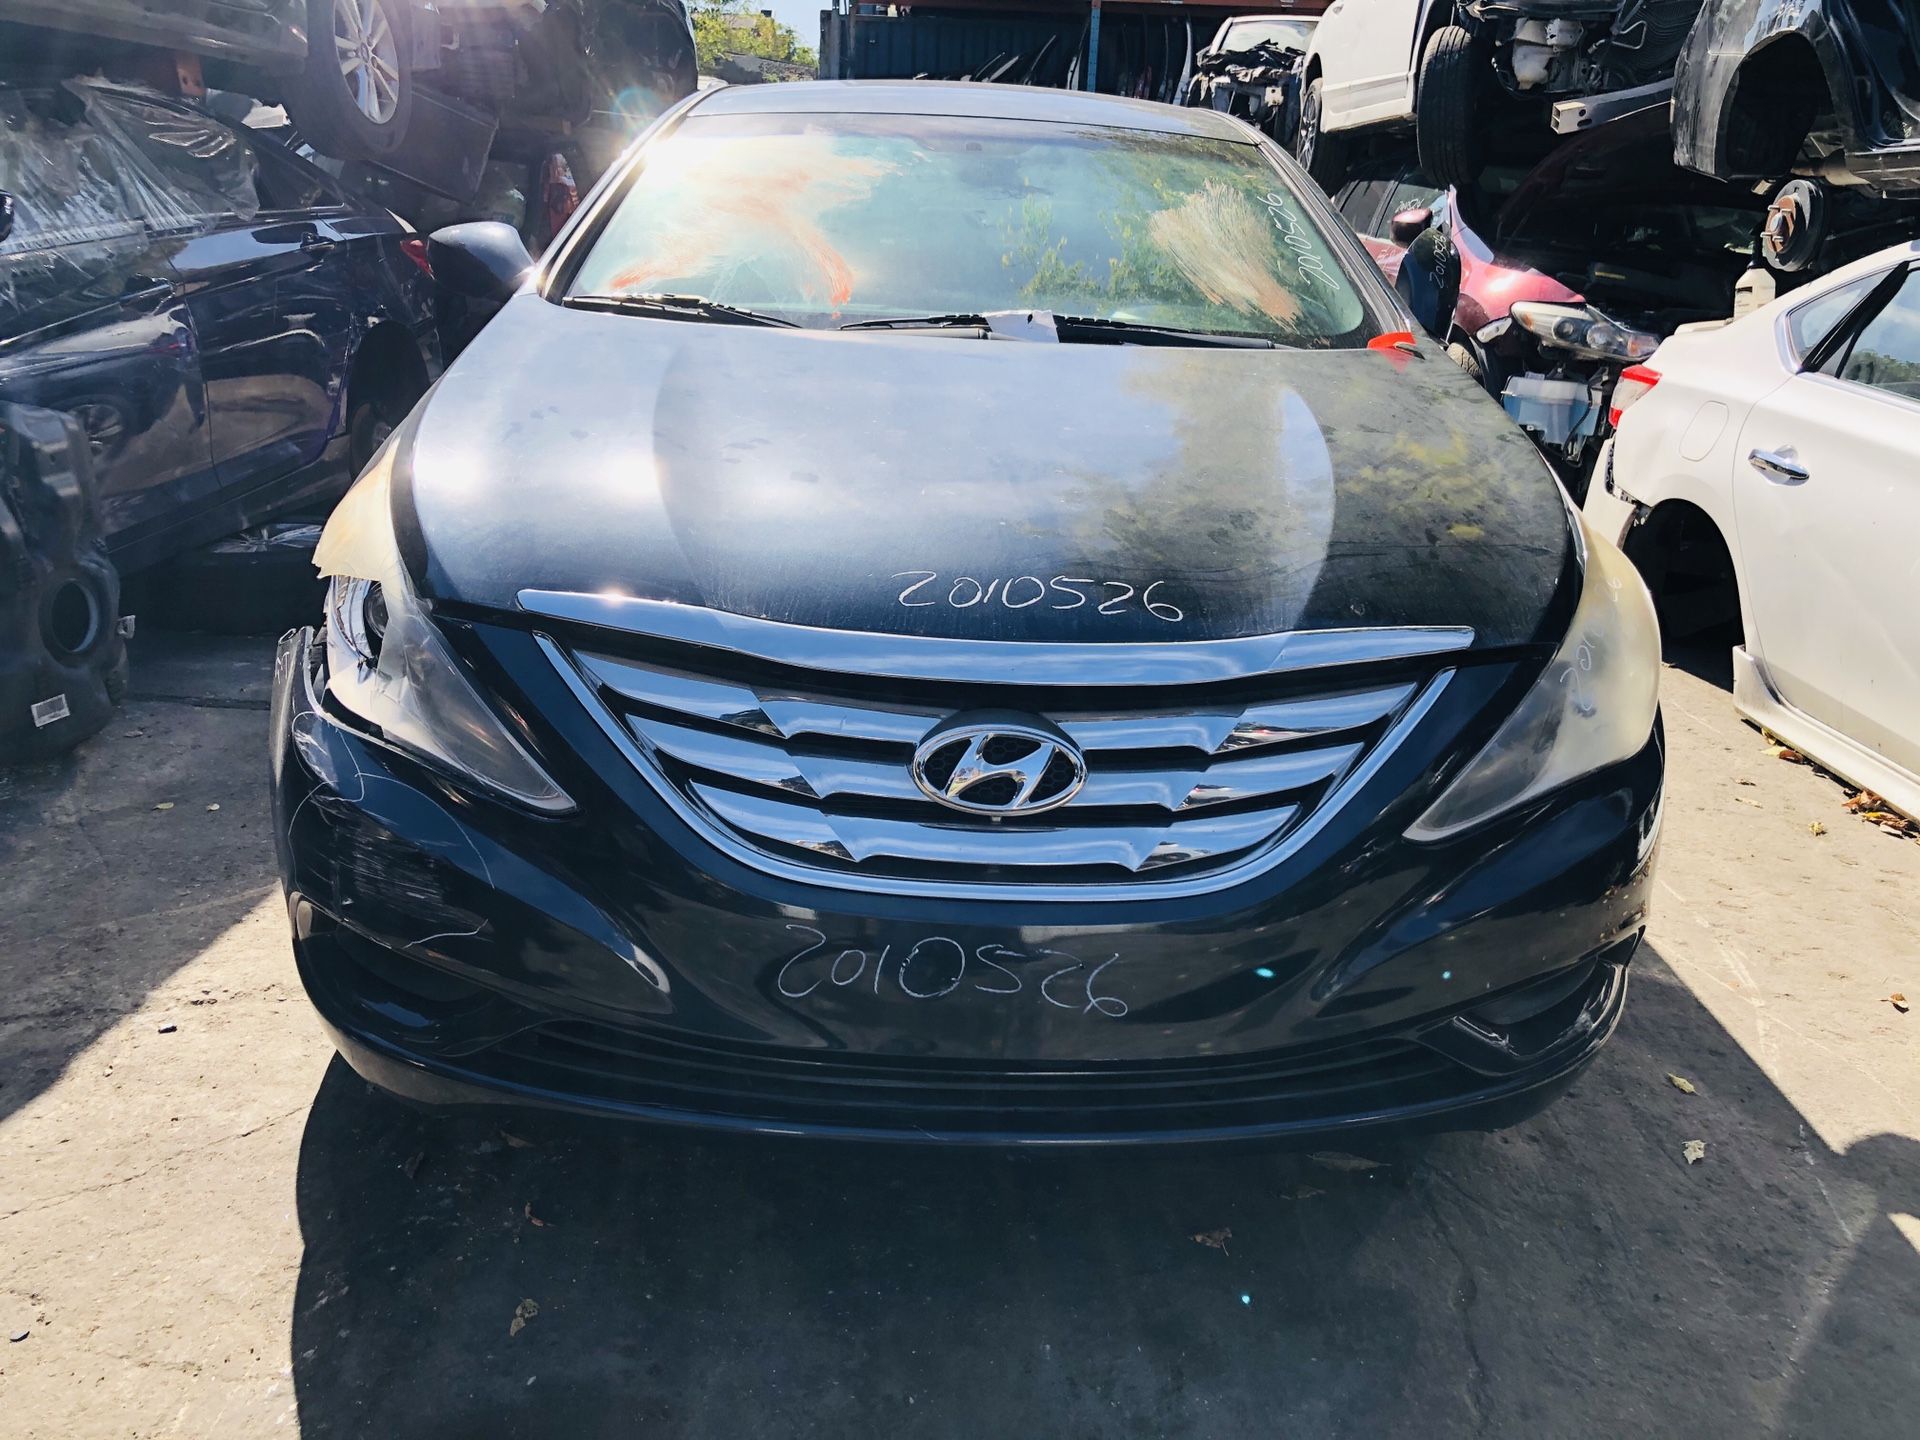 Hyundai Sonata 2011 (2010526) Selling Parts Only Vehicle Not For Sale